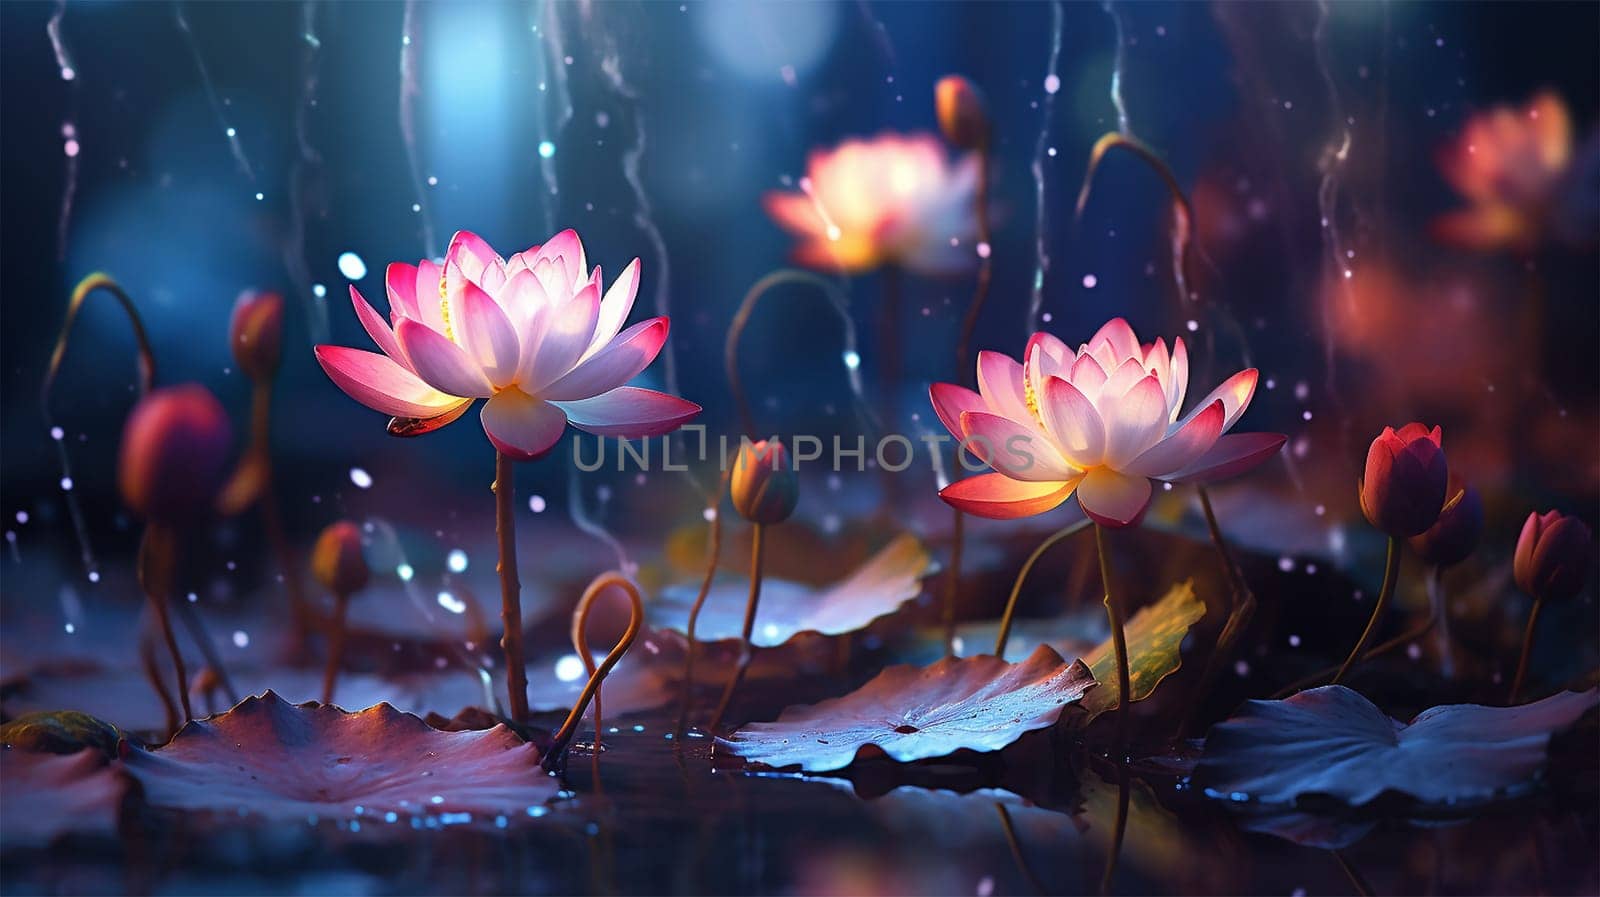 Magical pink water lily by night, lotus flower Orange Sunset in the garden pond. Close-up of Nymphaea reflected in water. Flower landscape for nature wallpaper. background copy space. Sparkling bokeh lights. Lotus flower magic by Annebel146